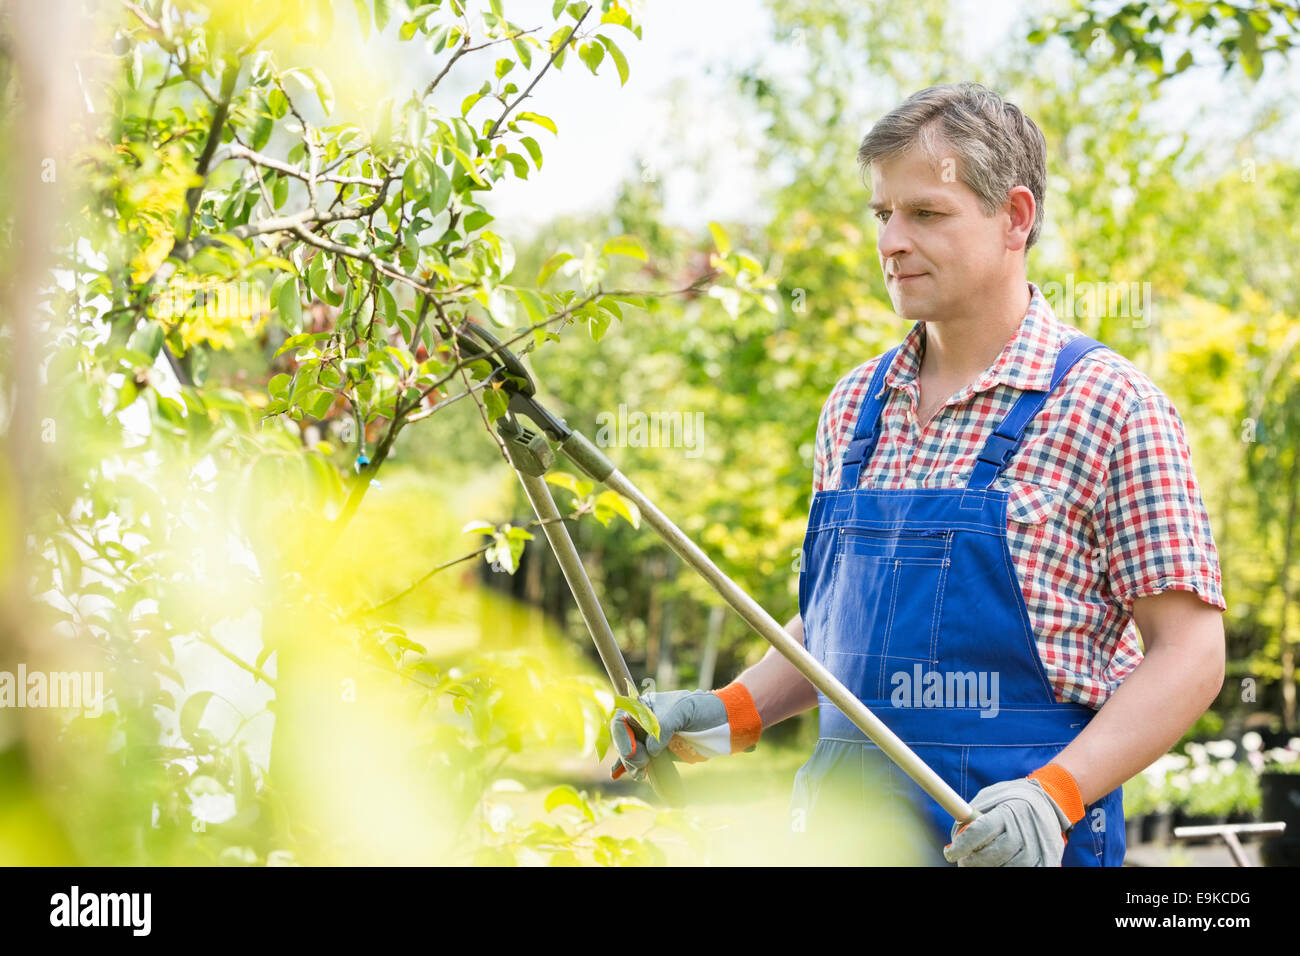 Gardener trimming tree branches at plant nursery Stock Photo